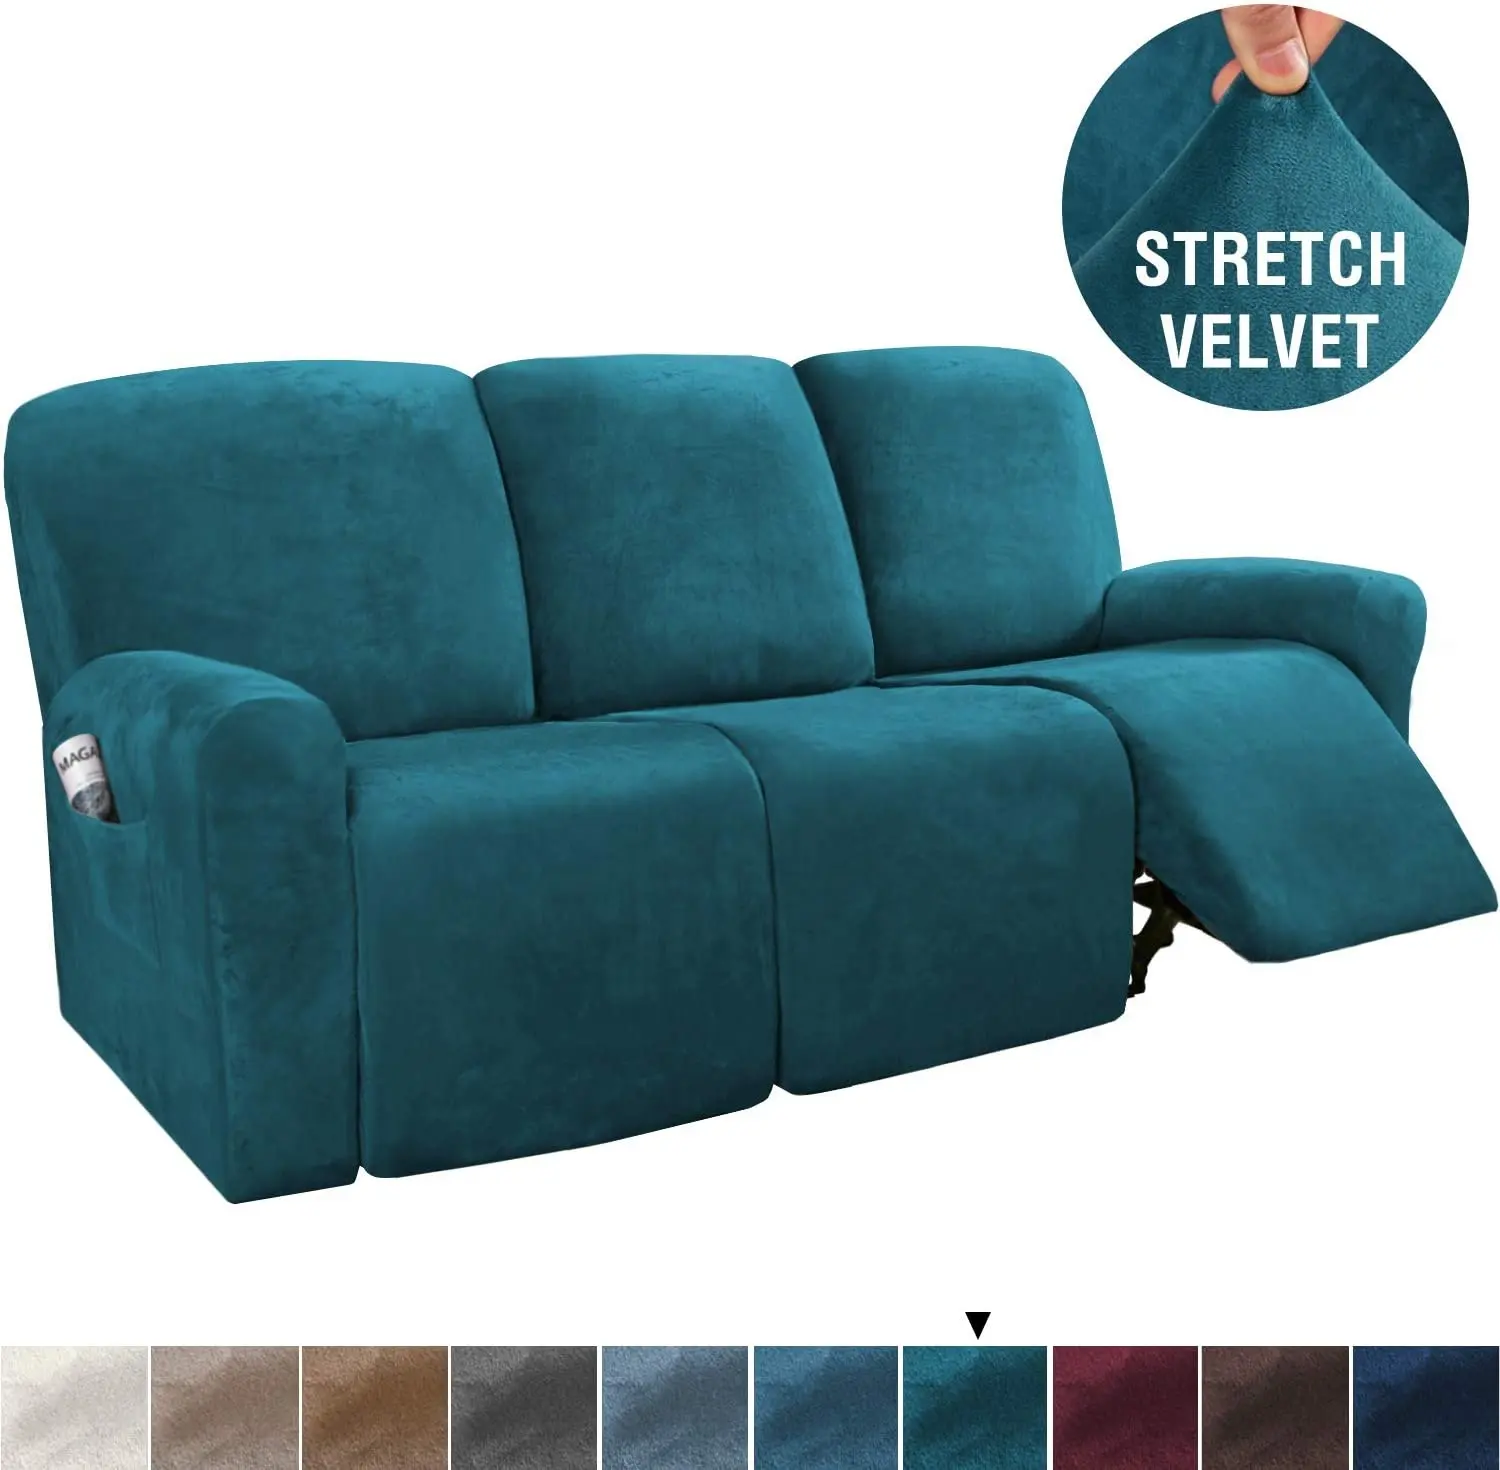 Amazon New Hot Sale Cover-para-sofa-reclinable Recliner Sofa Chair Cover Stretch Velvet Couch Sofa Slipcover